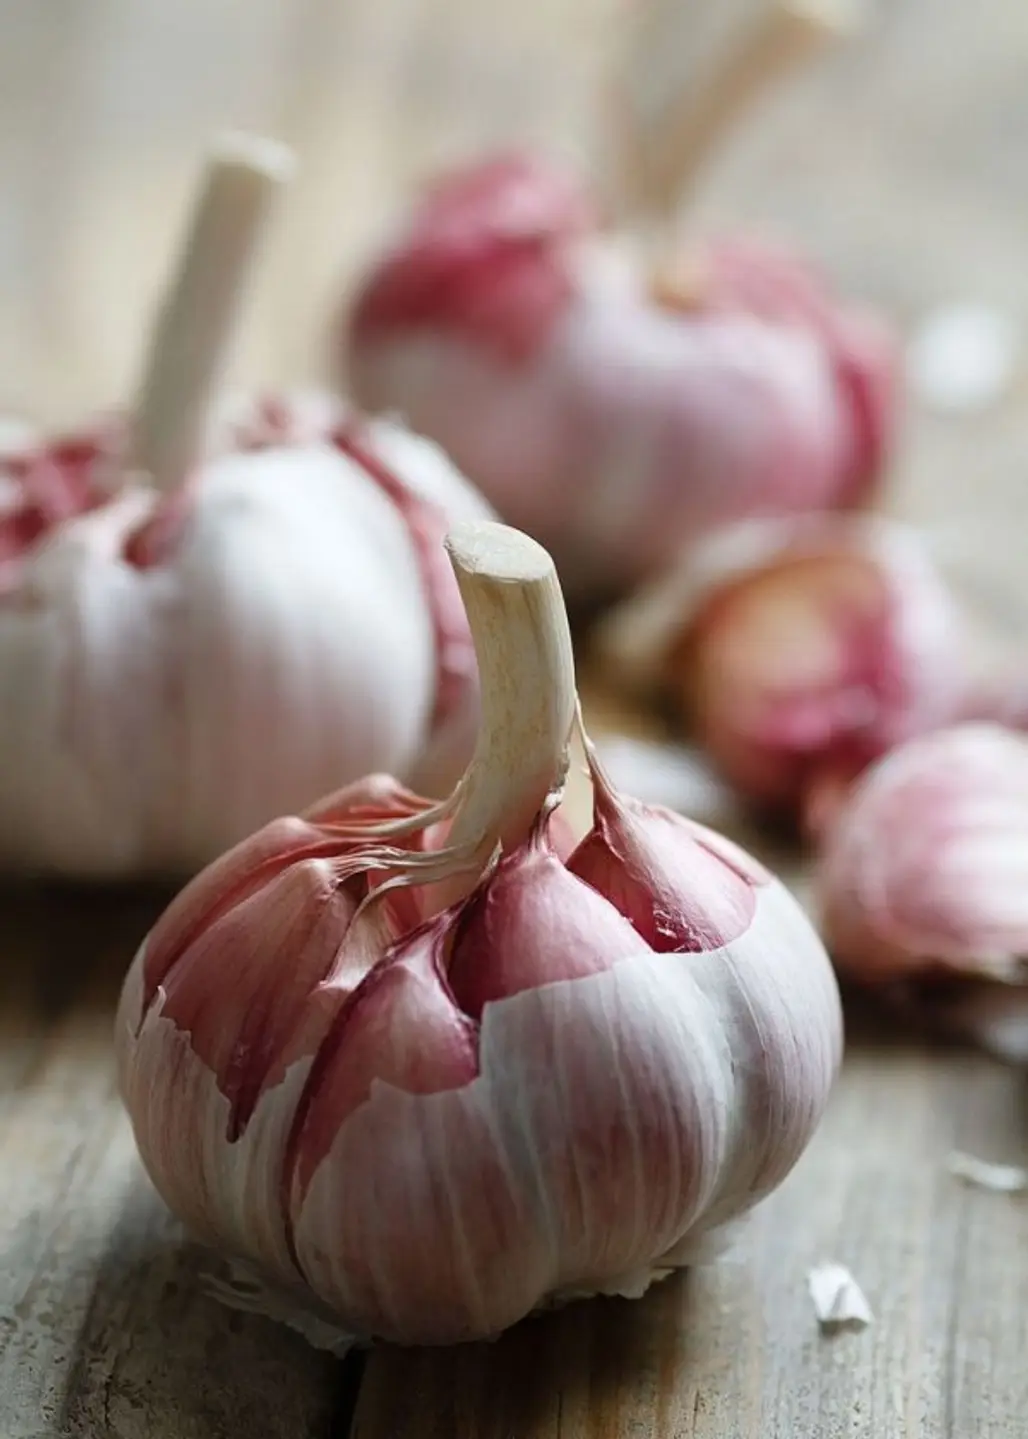 You Can’t Go Wrong with Garlic